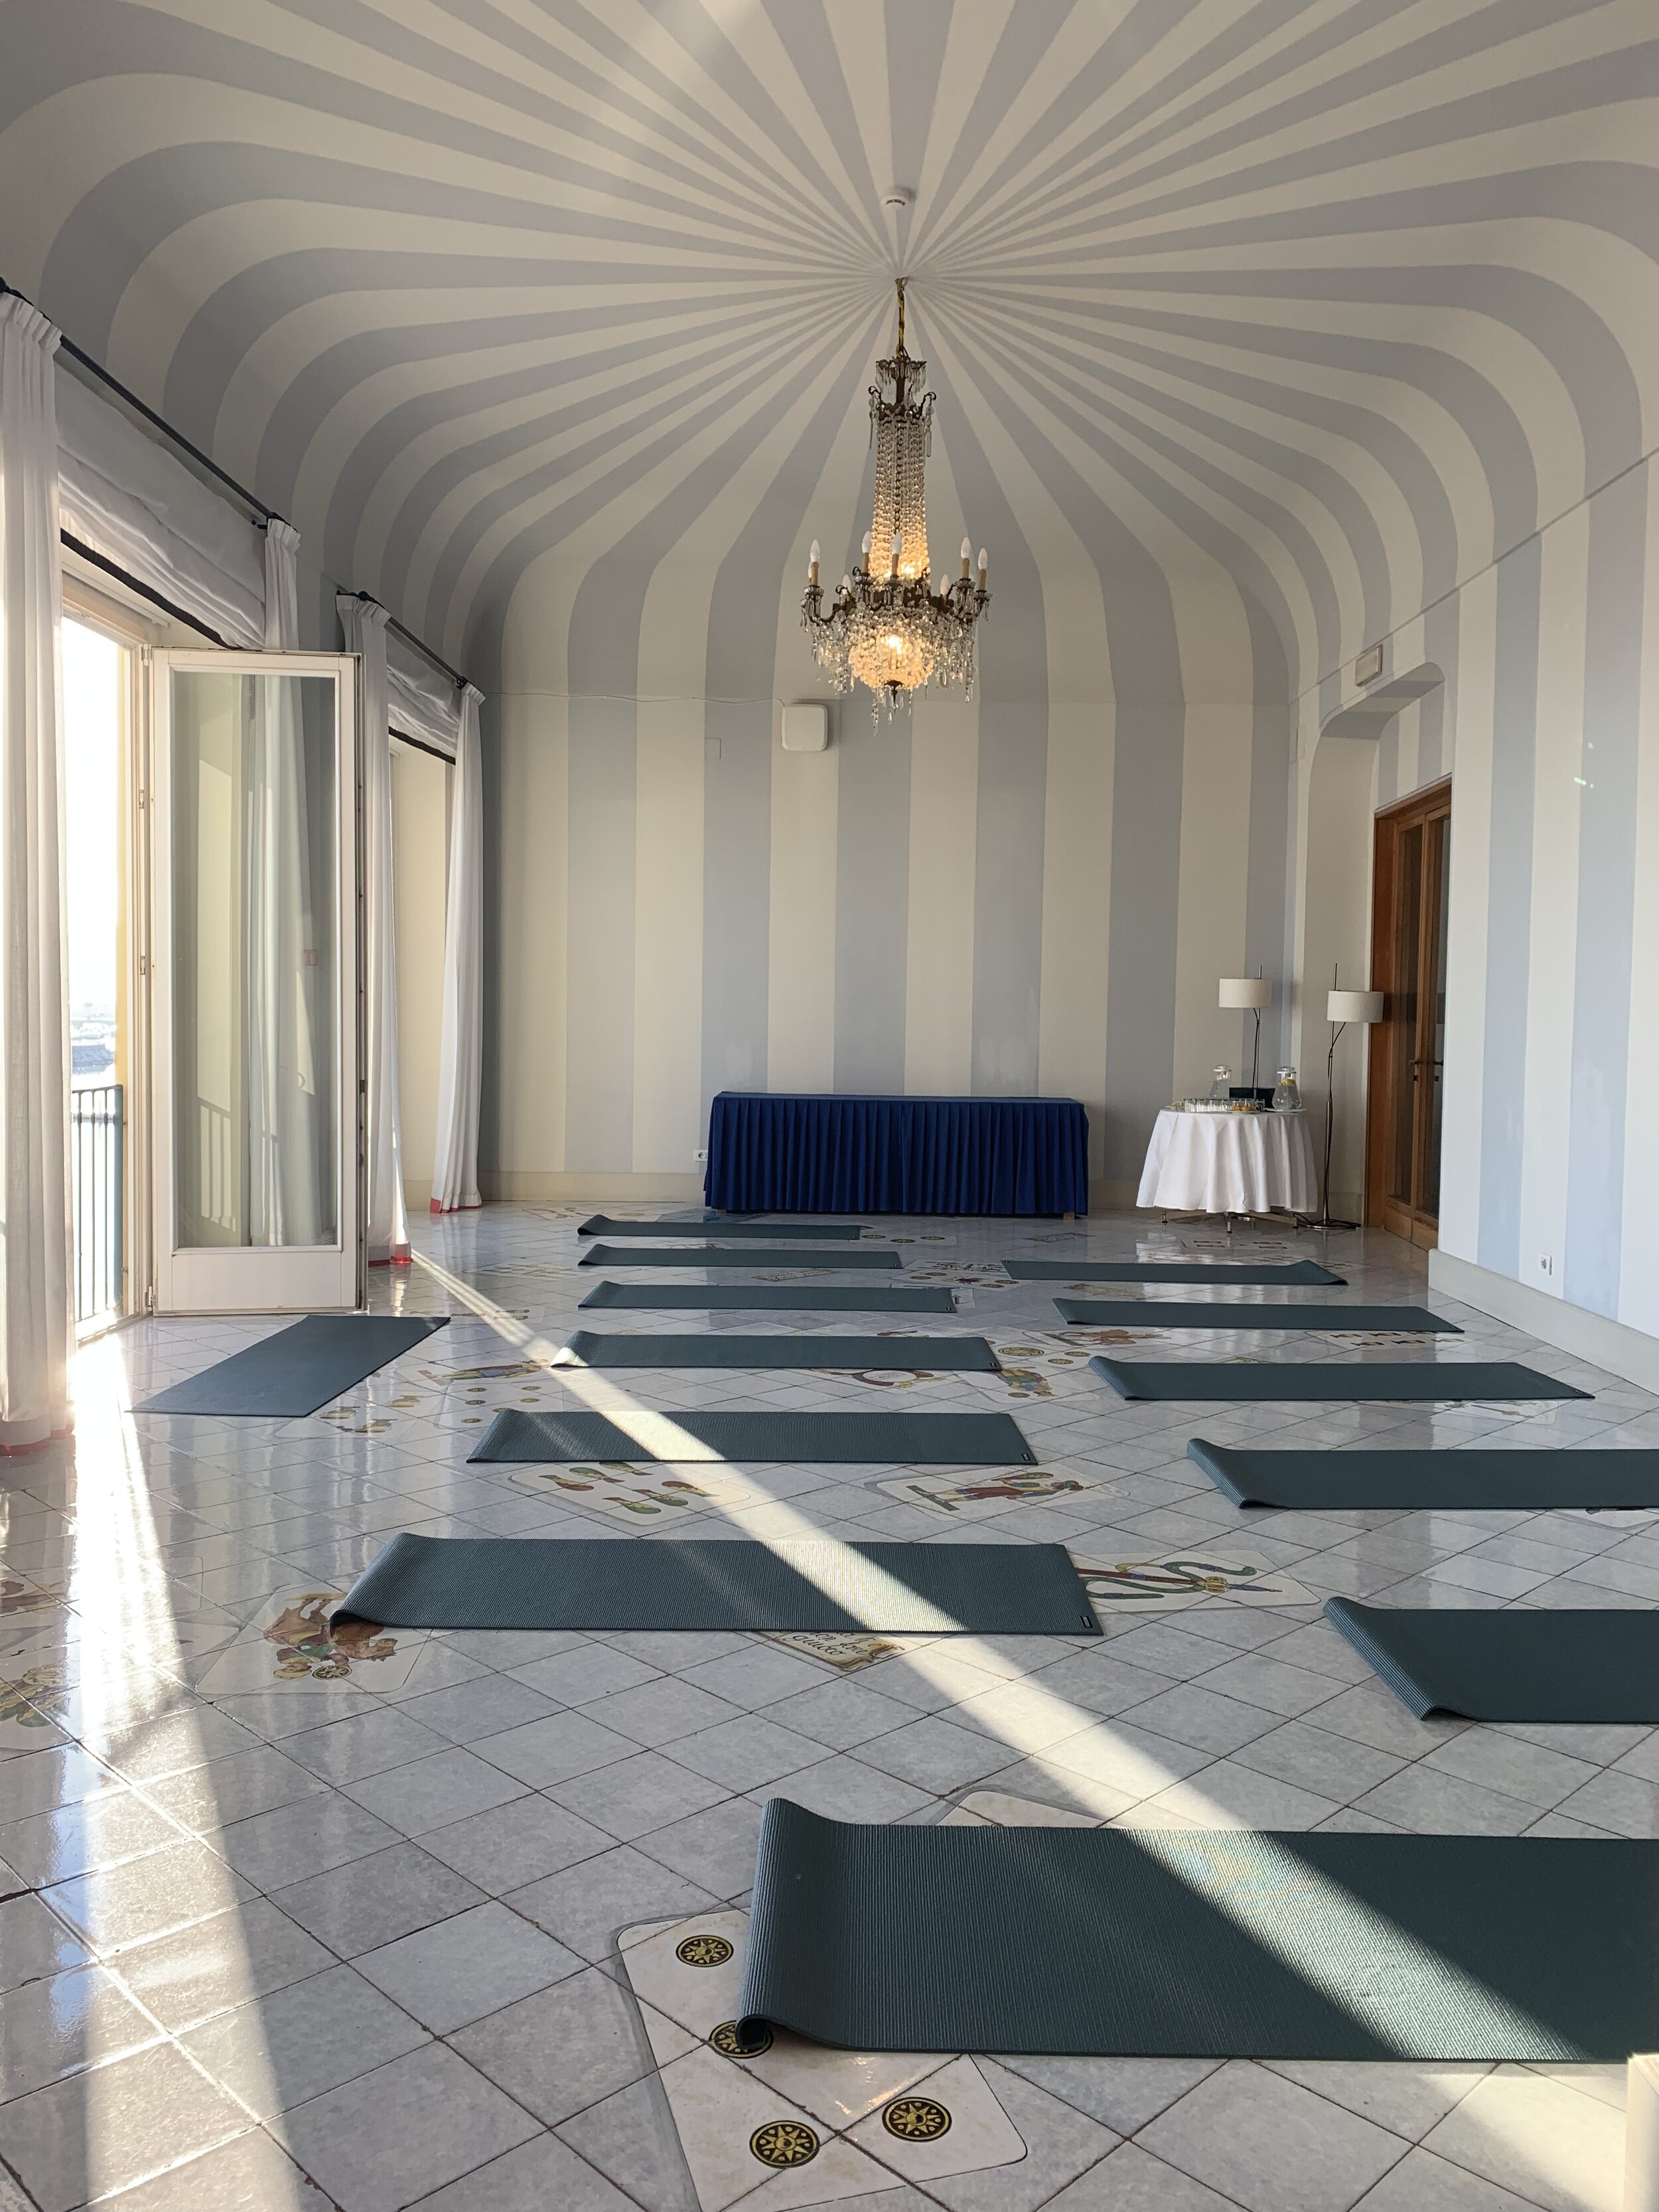 Striped walls and chandeliers in the yoga room | EAT.PRAY.MOVE Yoga Retreats | Ischia, Italy